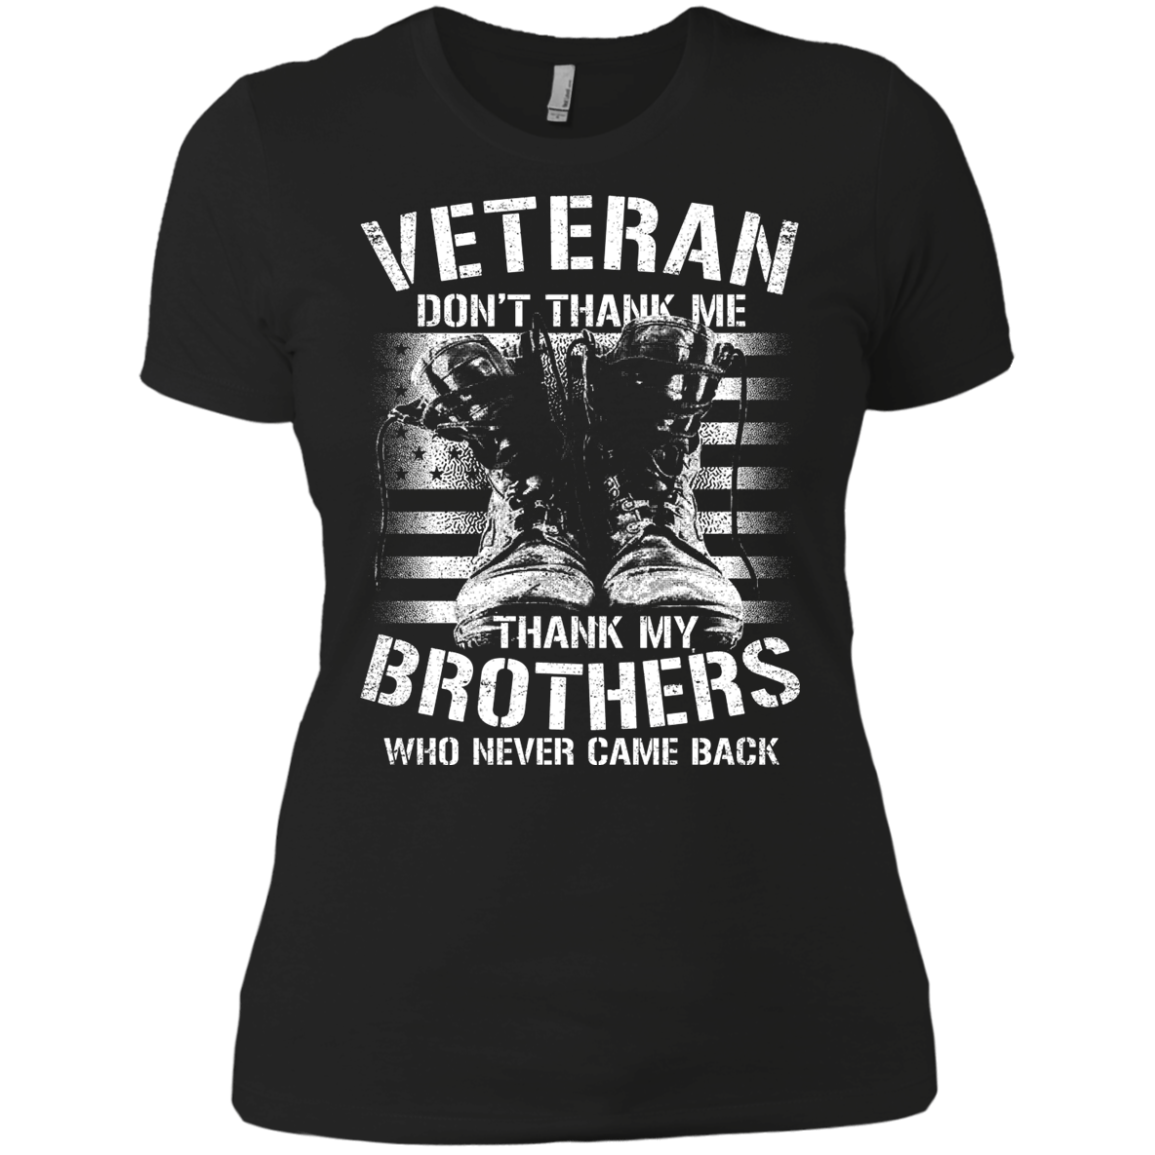 Don't Thank Me... Thank My Brothers - Apparel